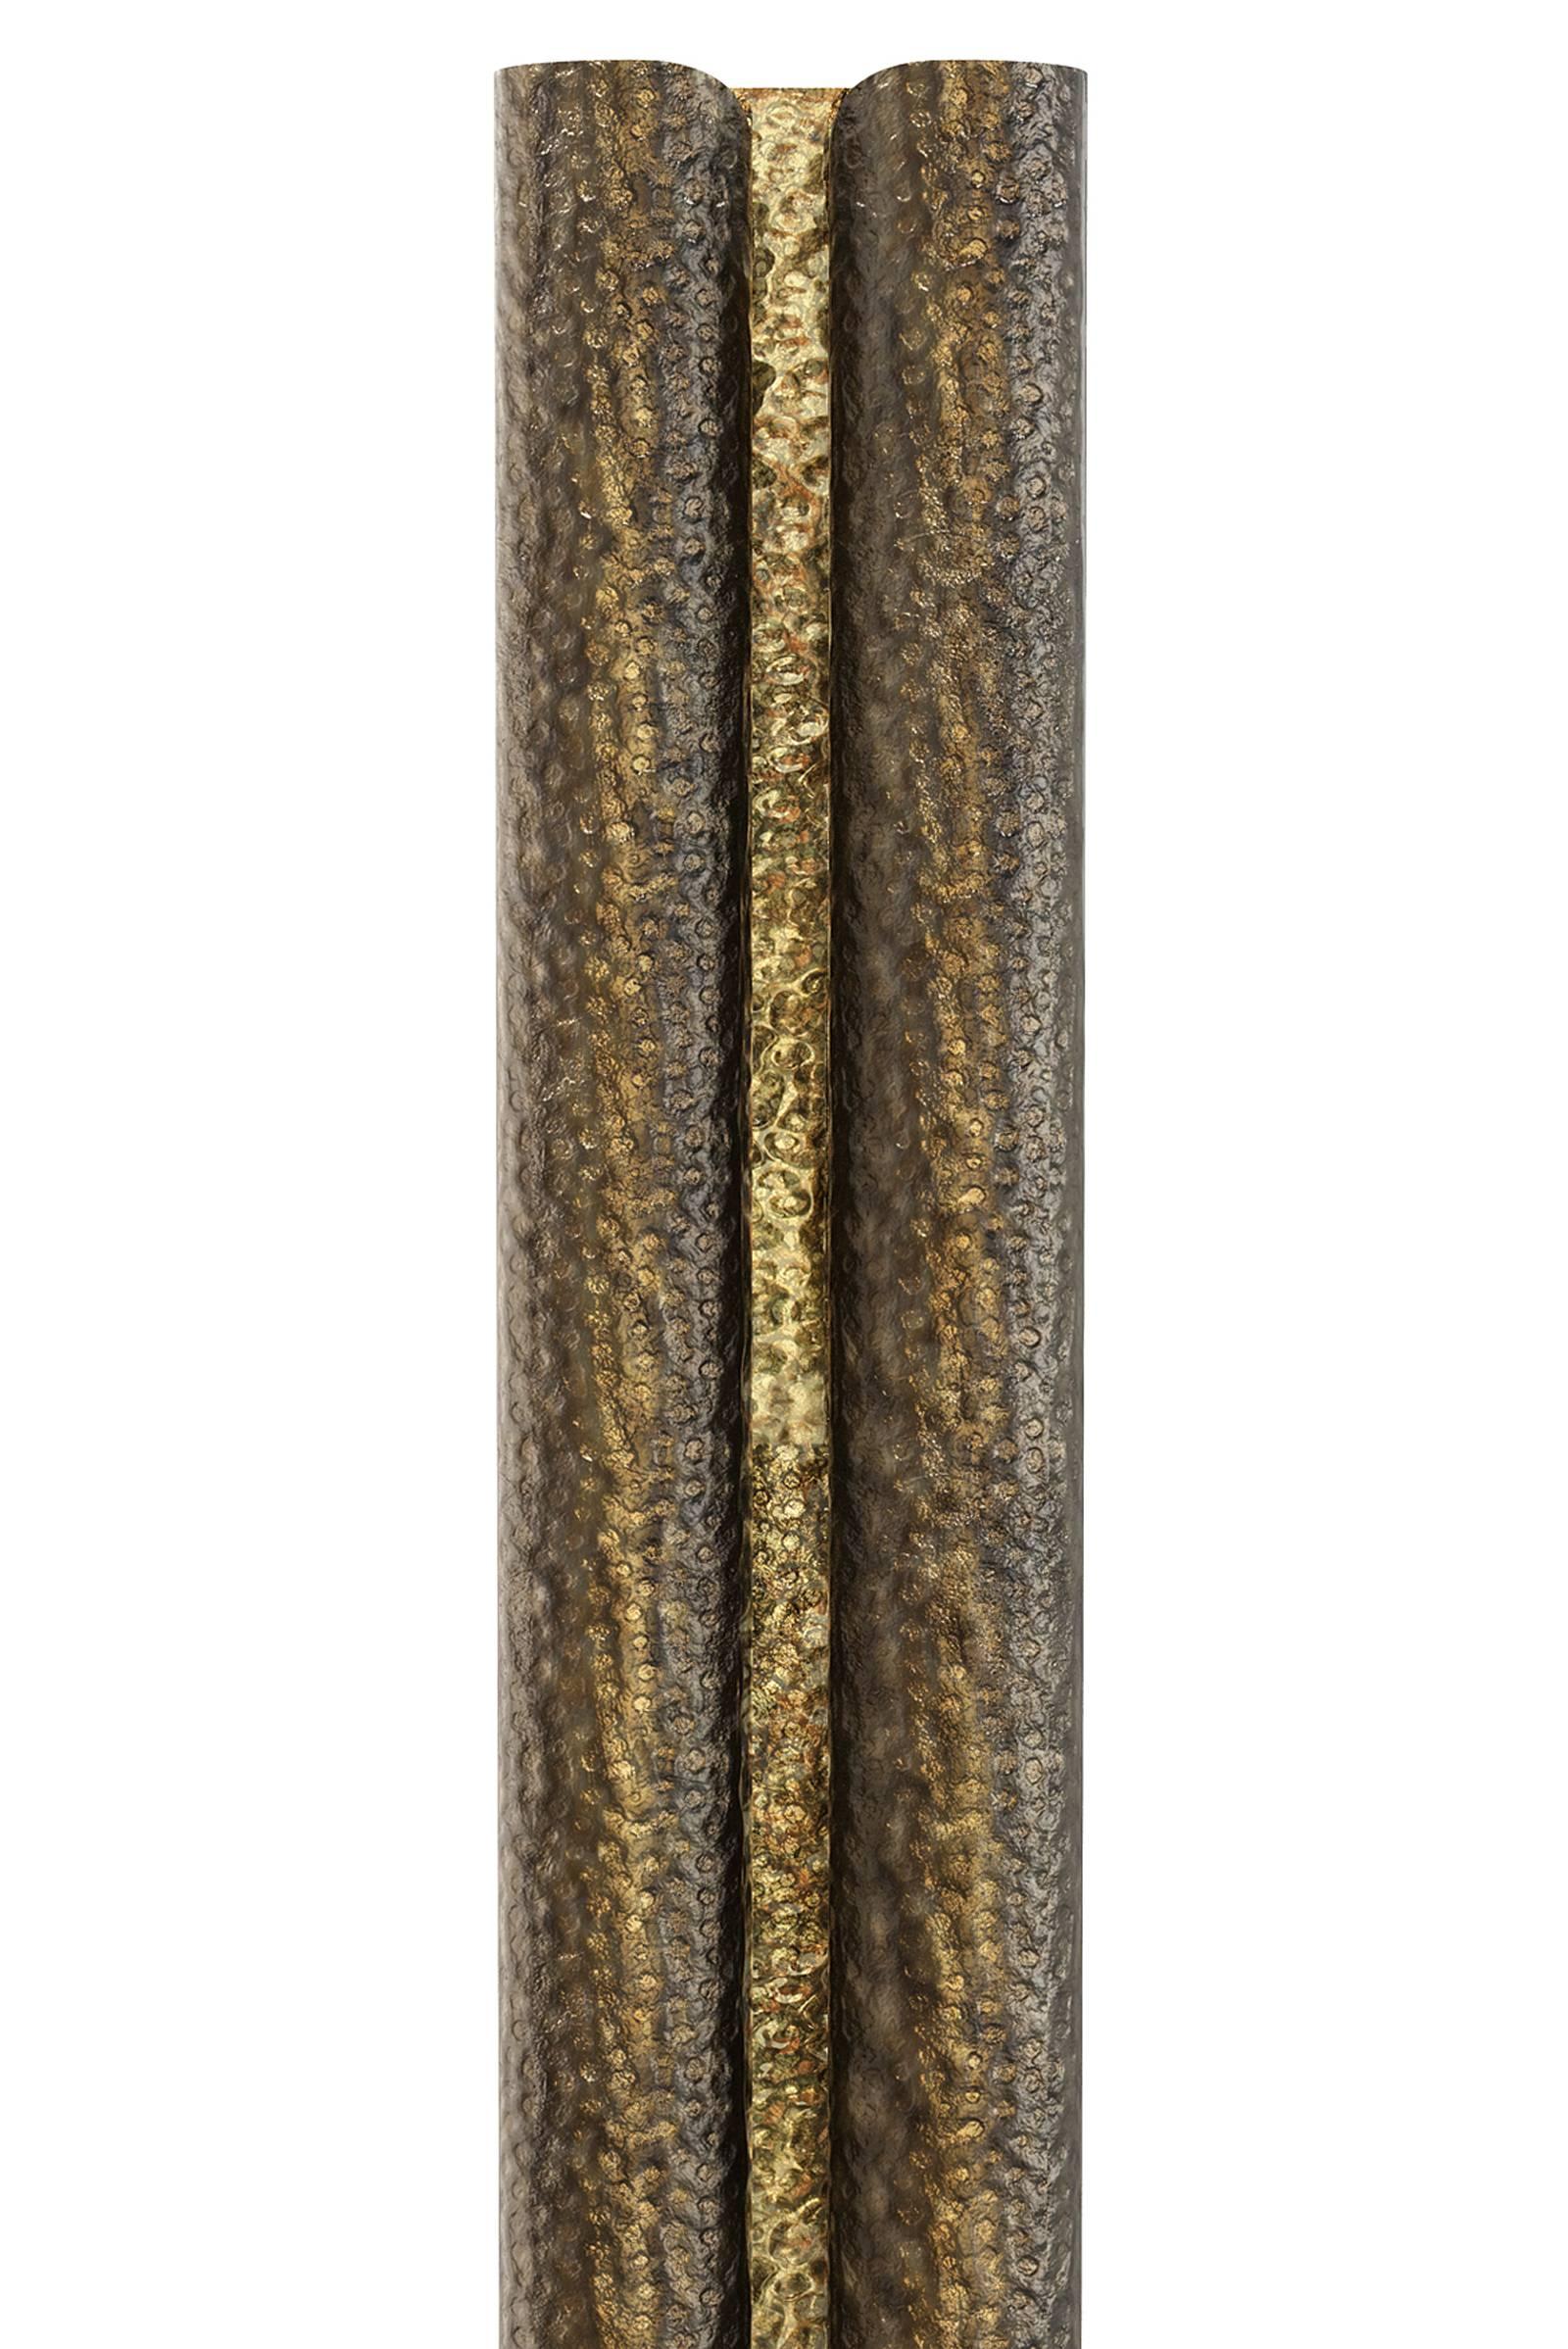 Portuguese Tuba Floor Lamp in Hammered Aged Brass For Sale